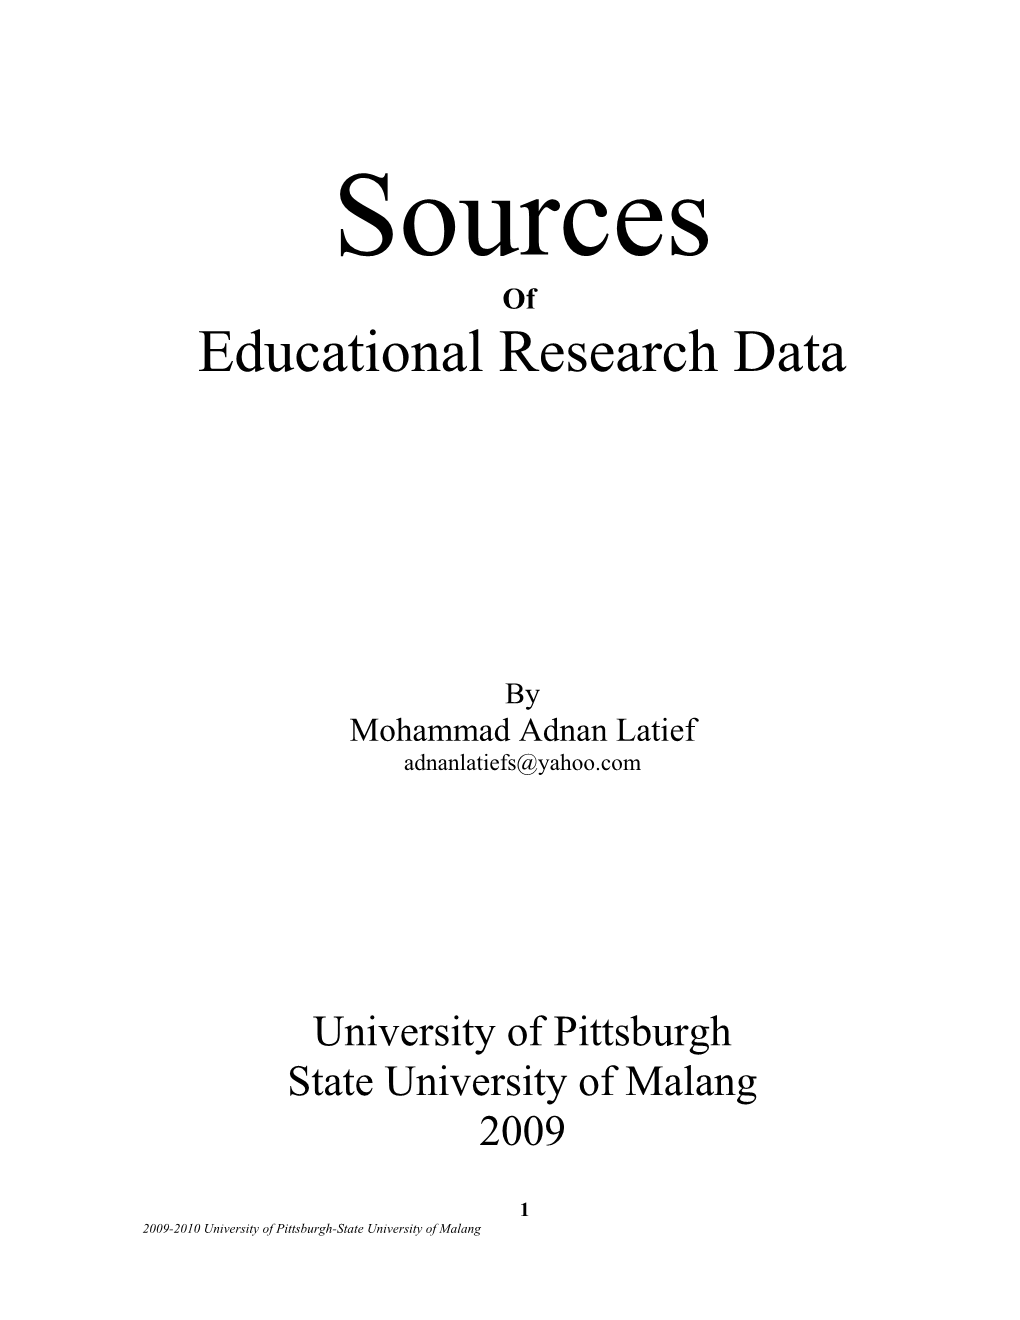 Educational Research Data